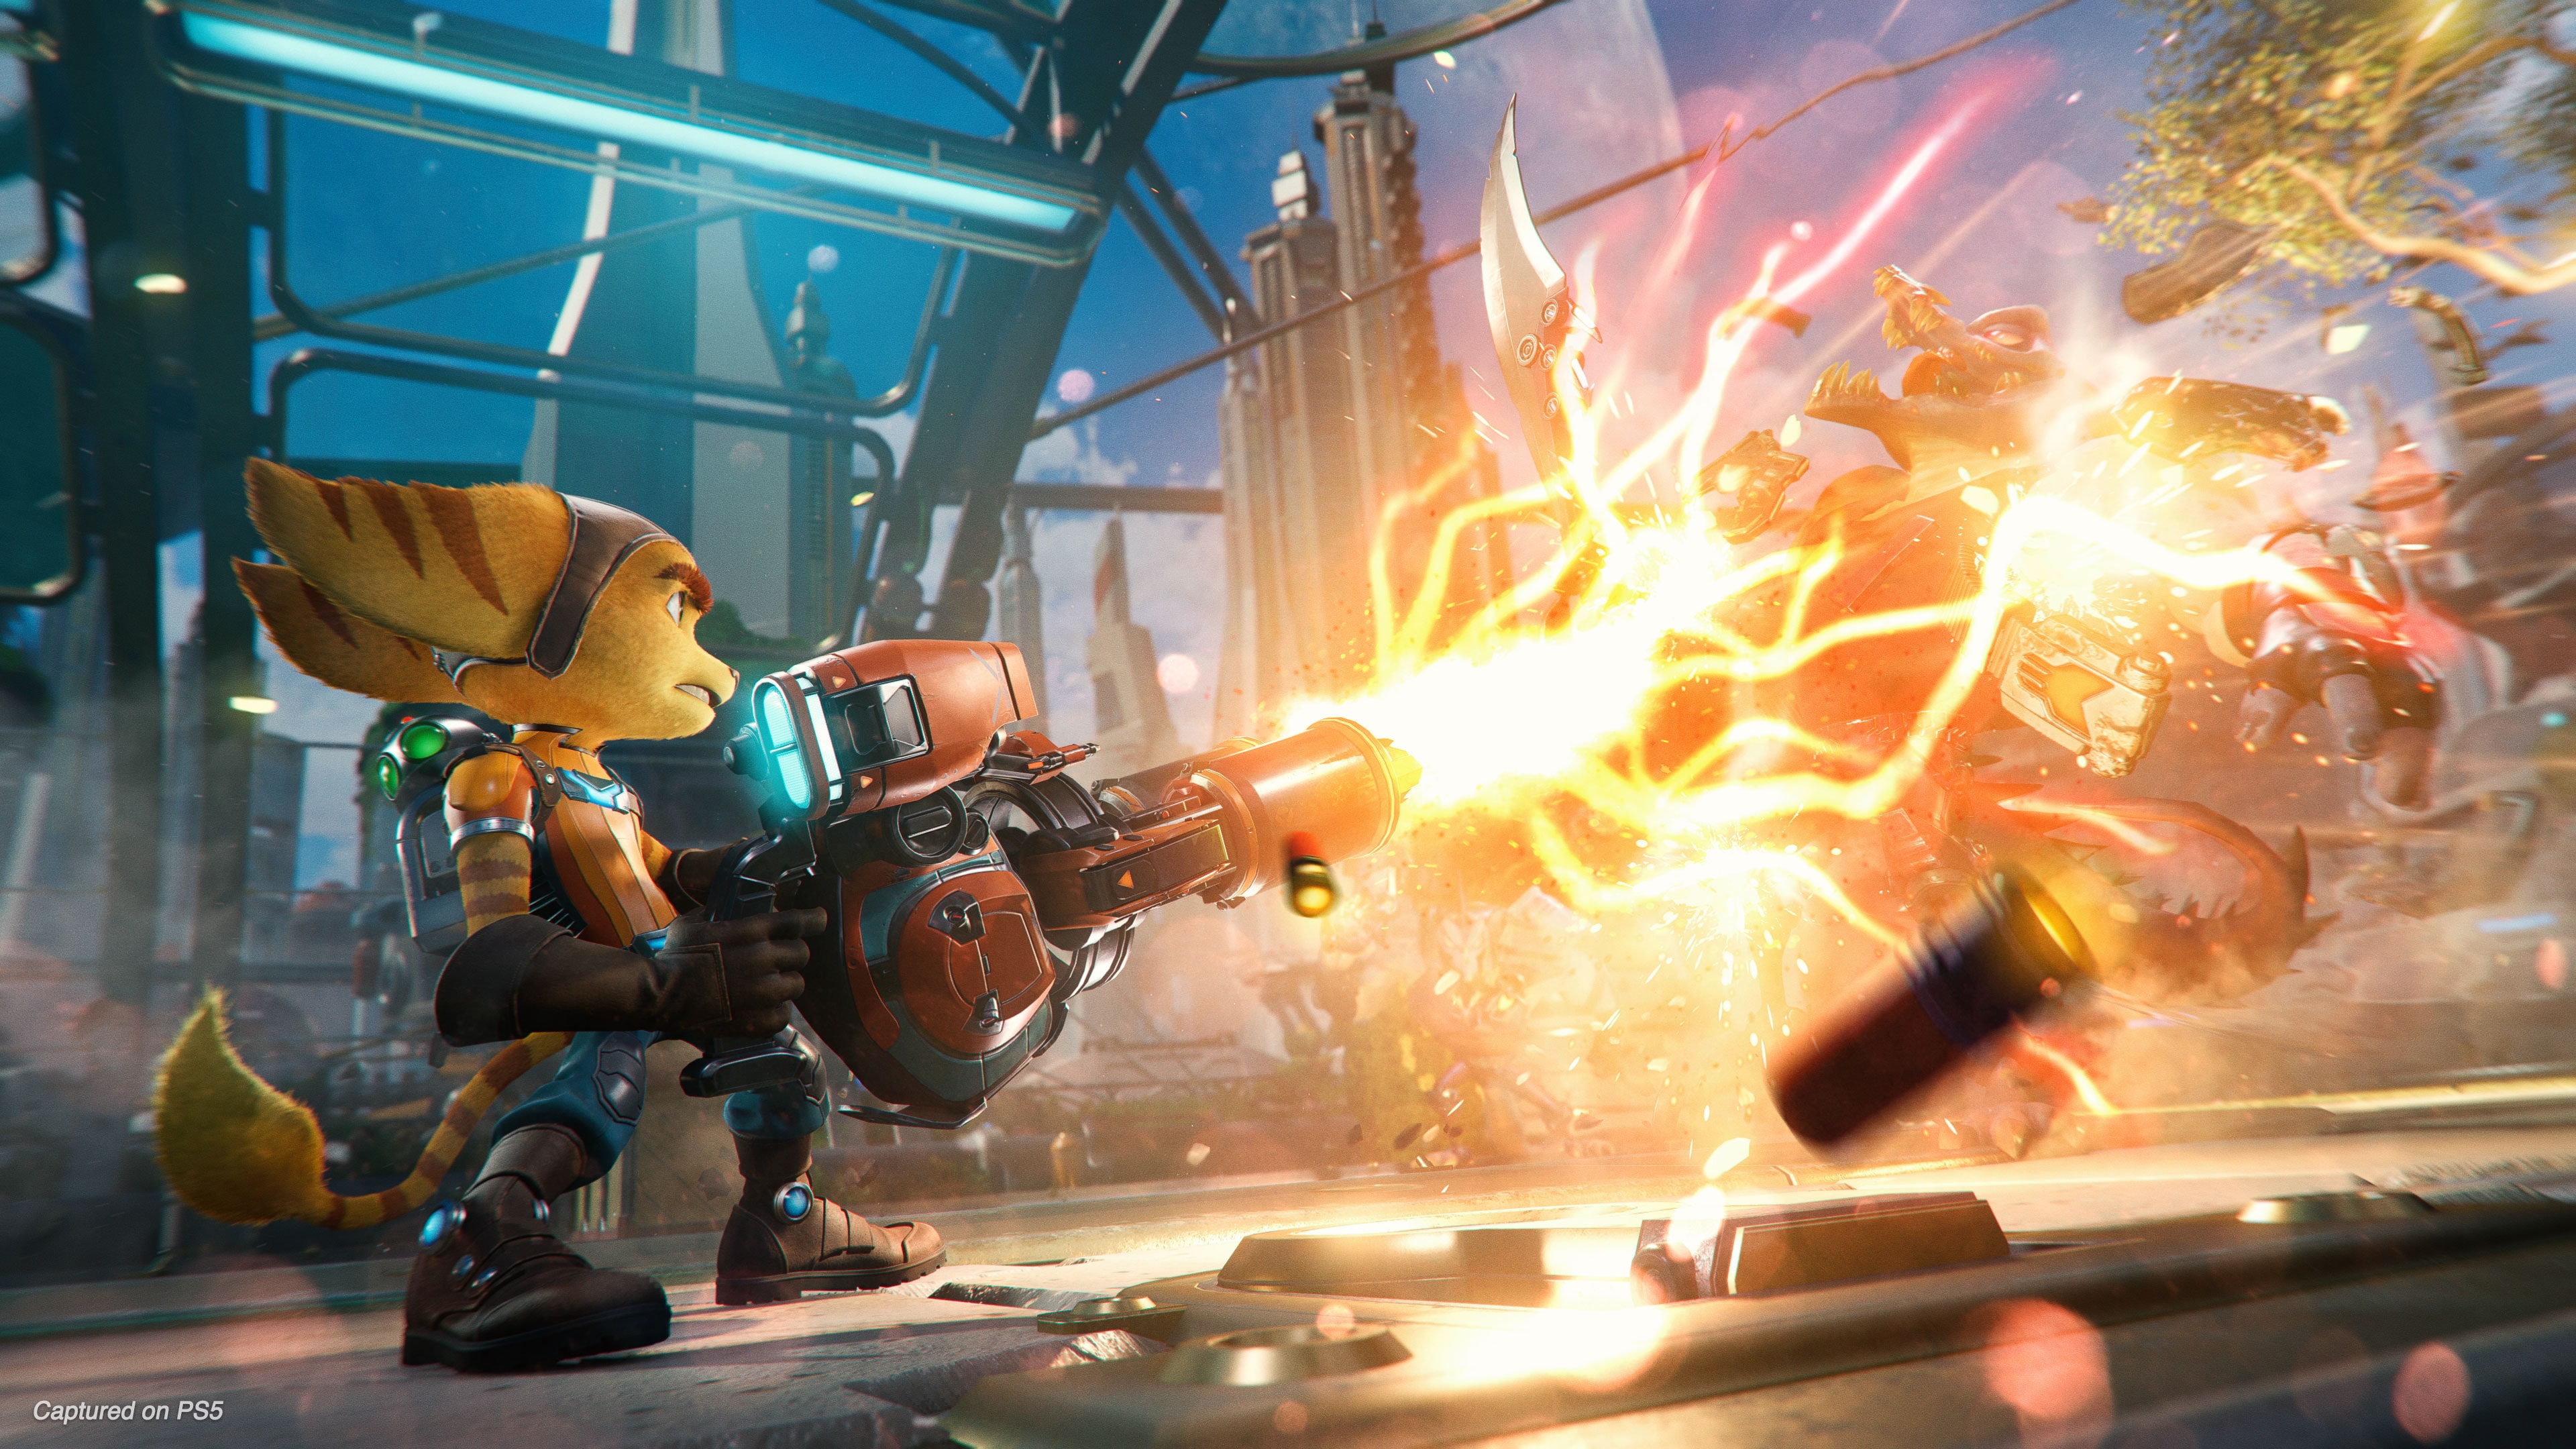 Ratchet and Clank PS4 Prices Digital or Physical Edition